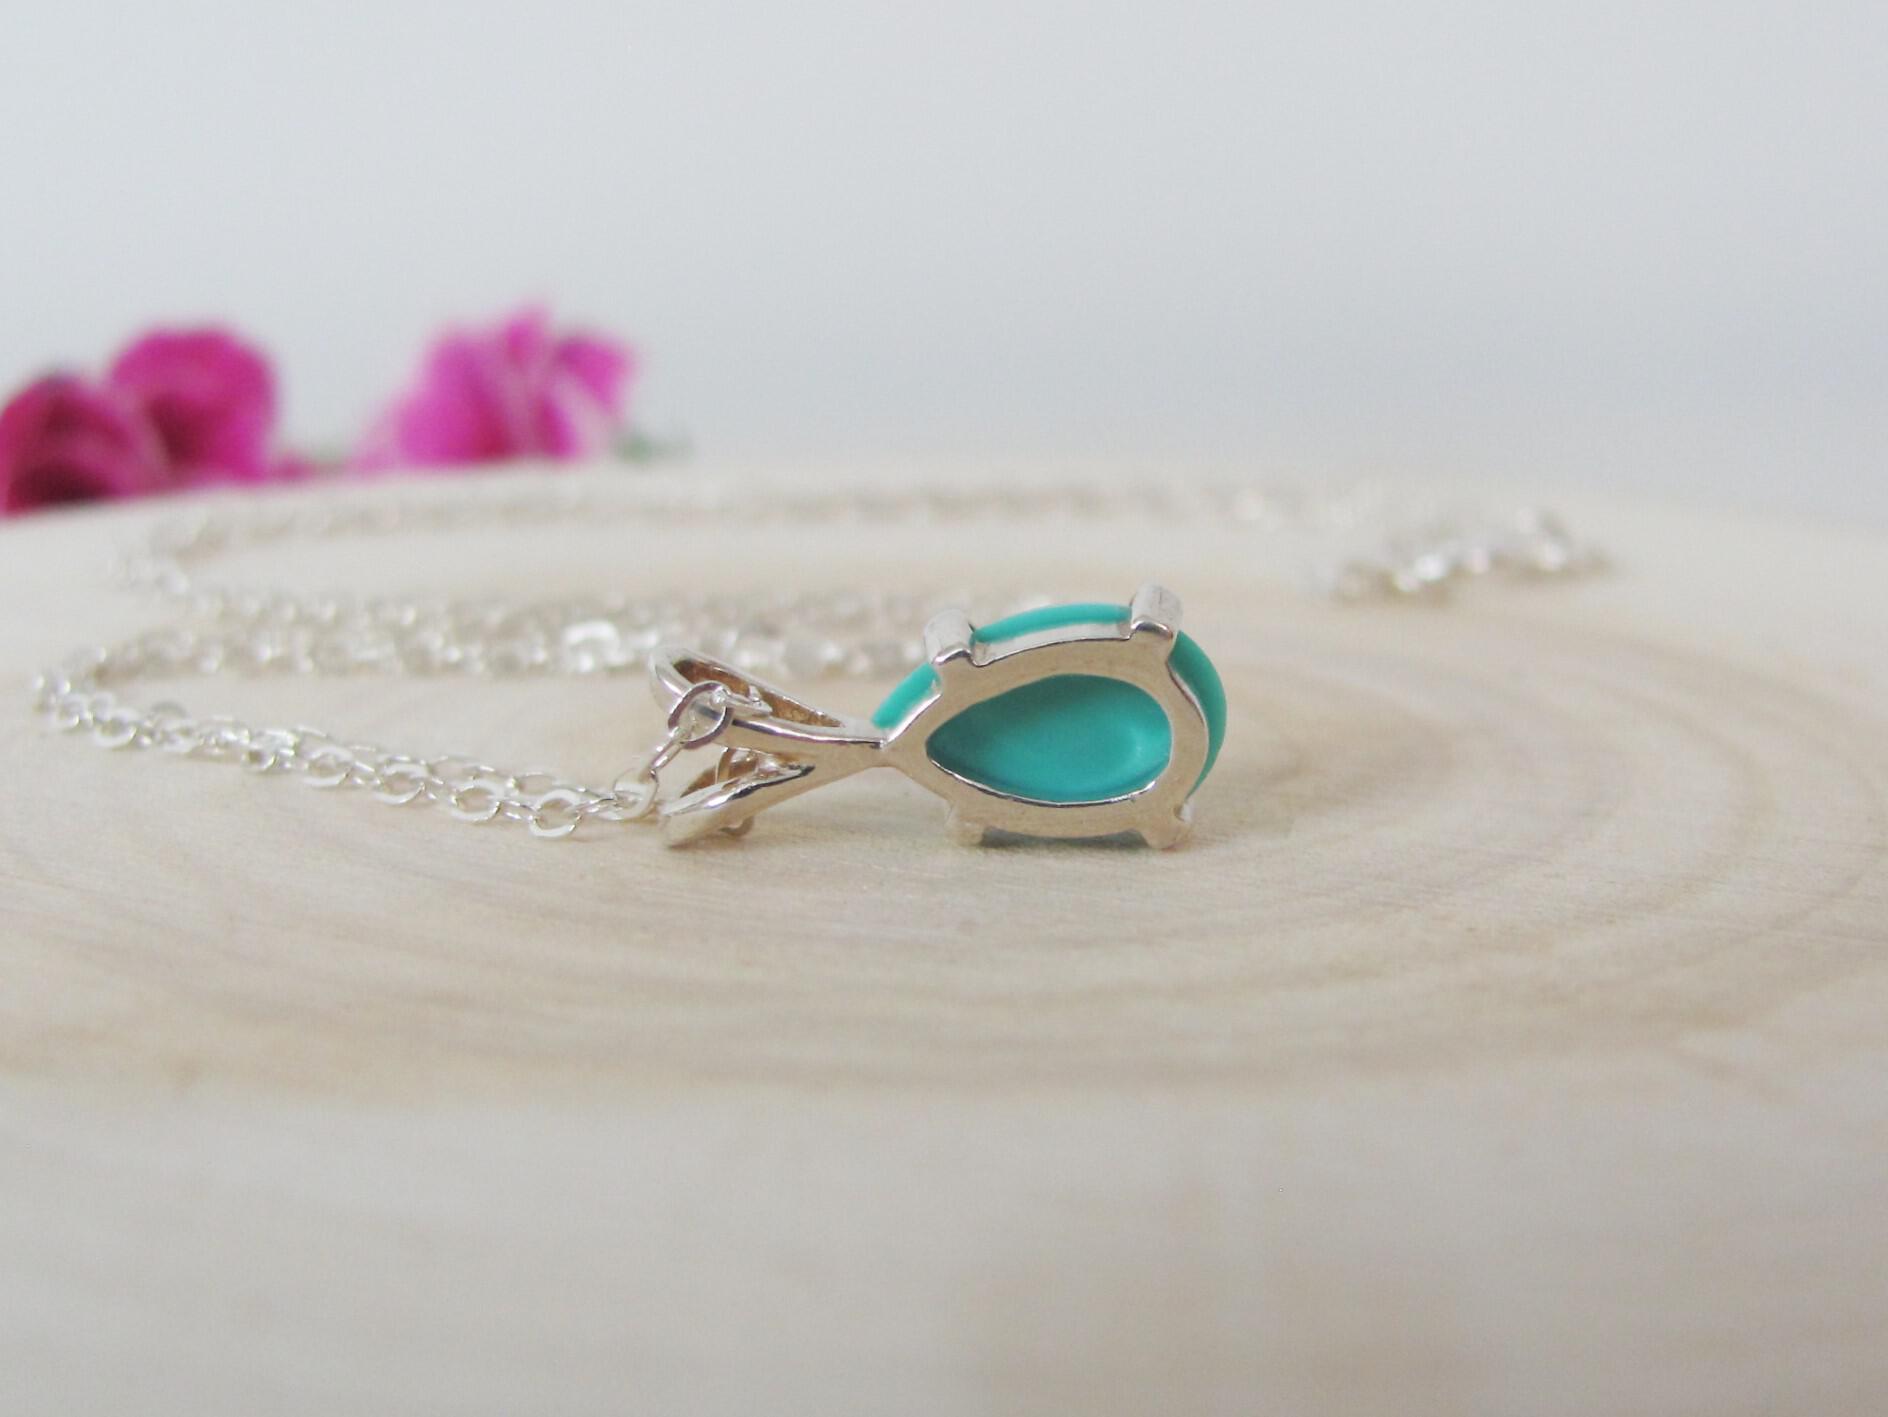 Turquoise Necklace in Sterling Silver, Sleeping Beauty Turquoise